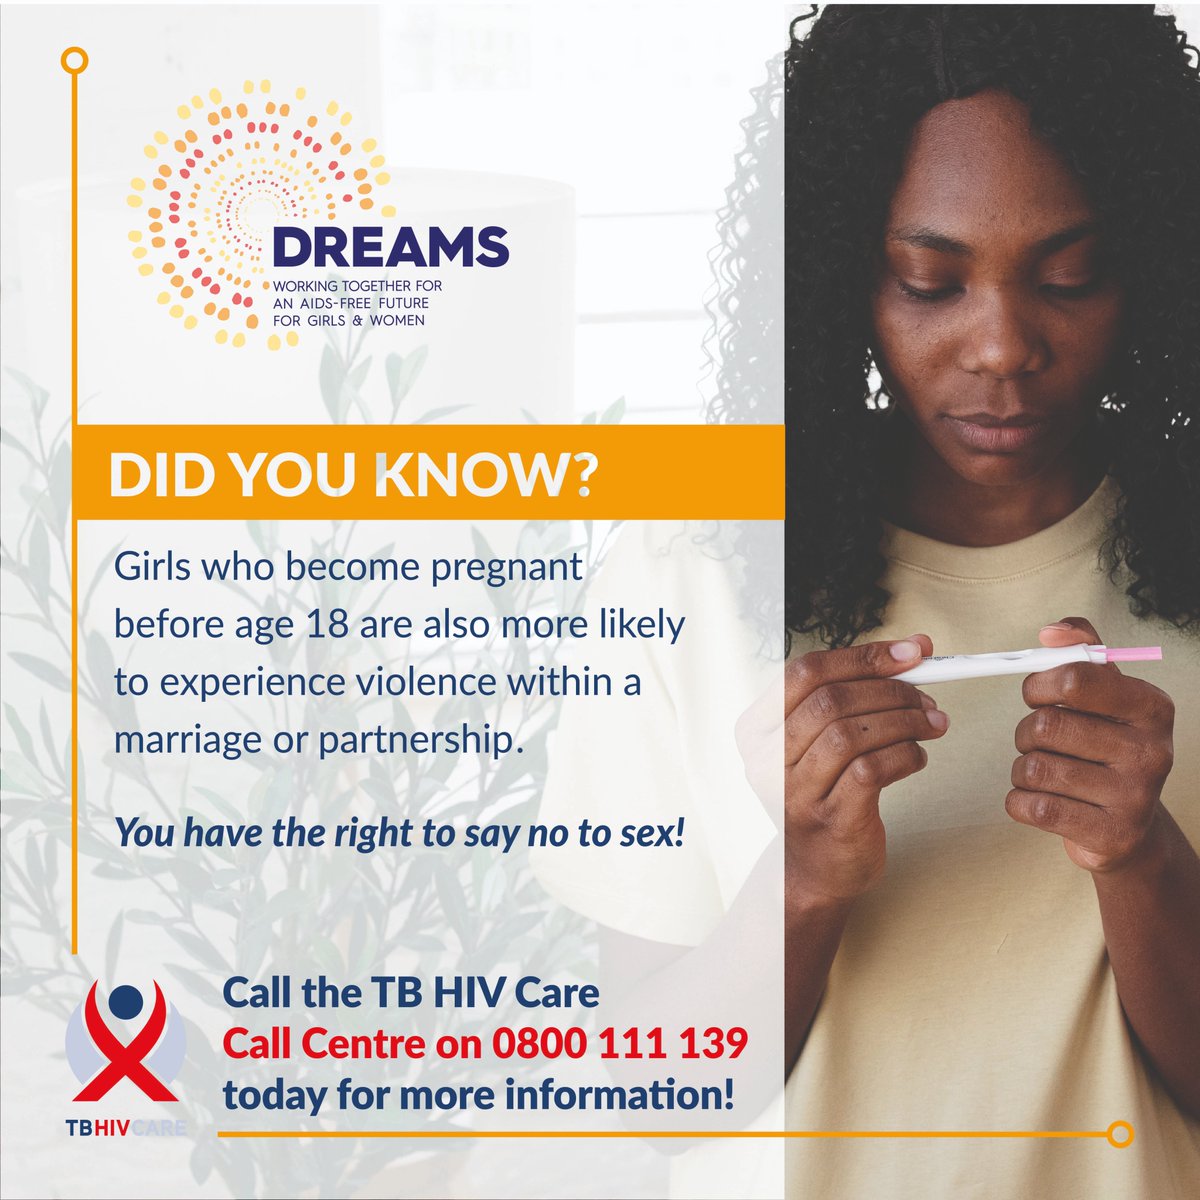 Did you know? Girls who become pregnant before age 18 have a higher chance of experiencing violence within a marriage or partnership. #TeenPregnancy #GBV